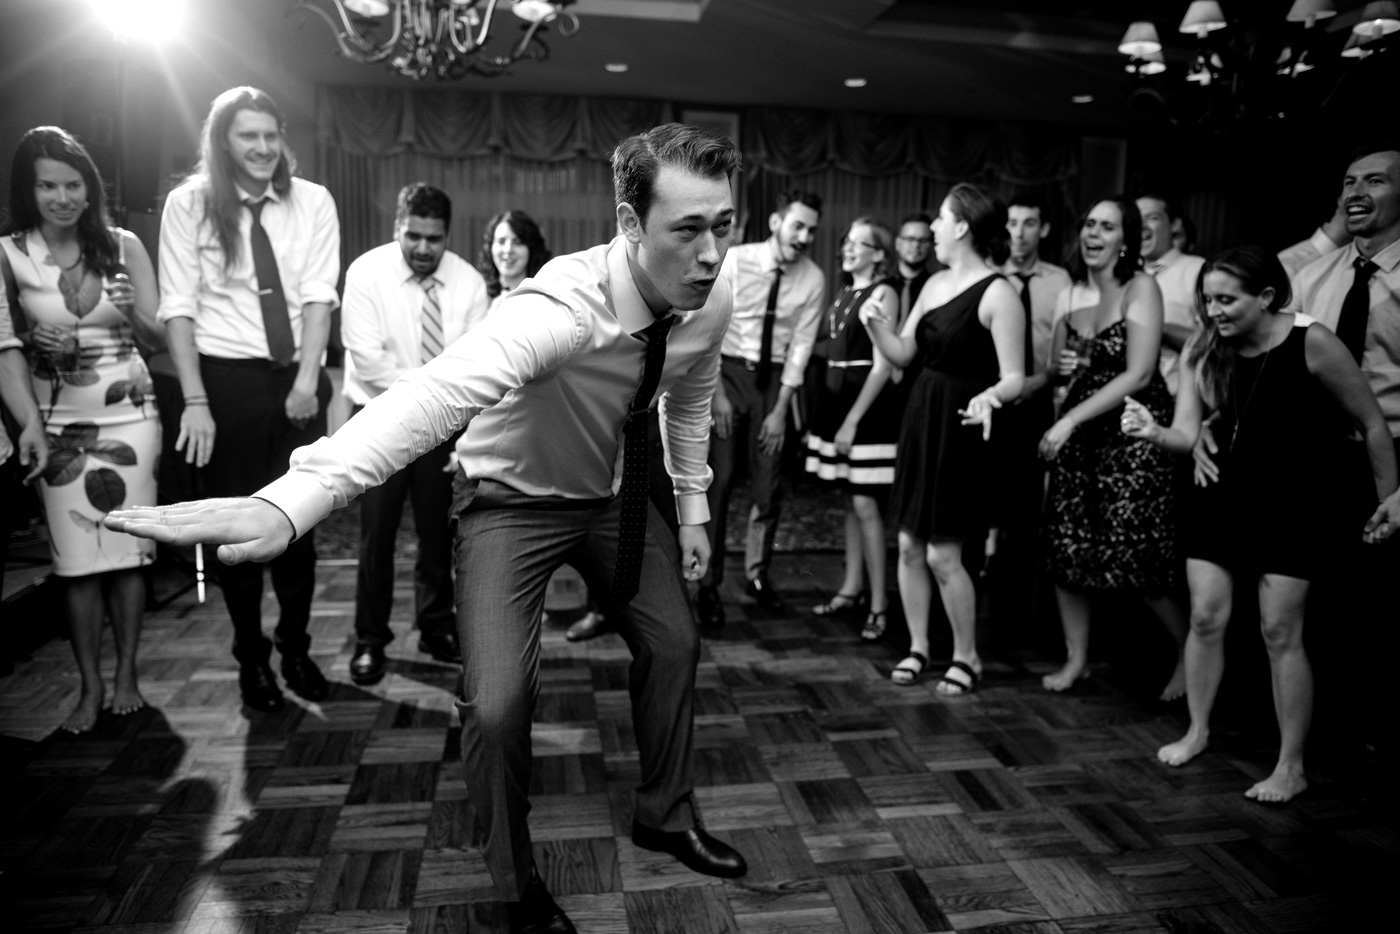 st clair country club wedding reception dancing hotline bling